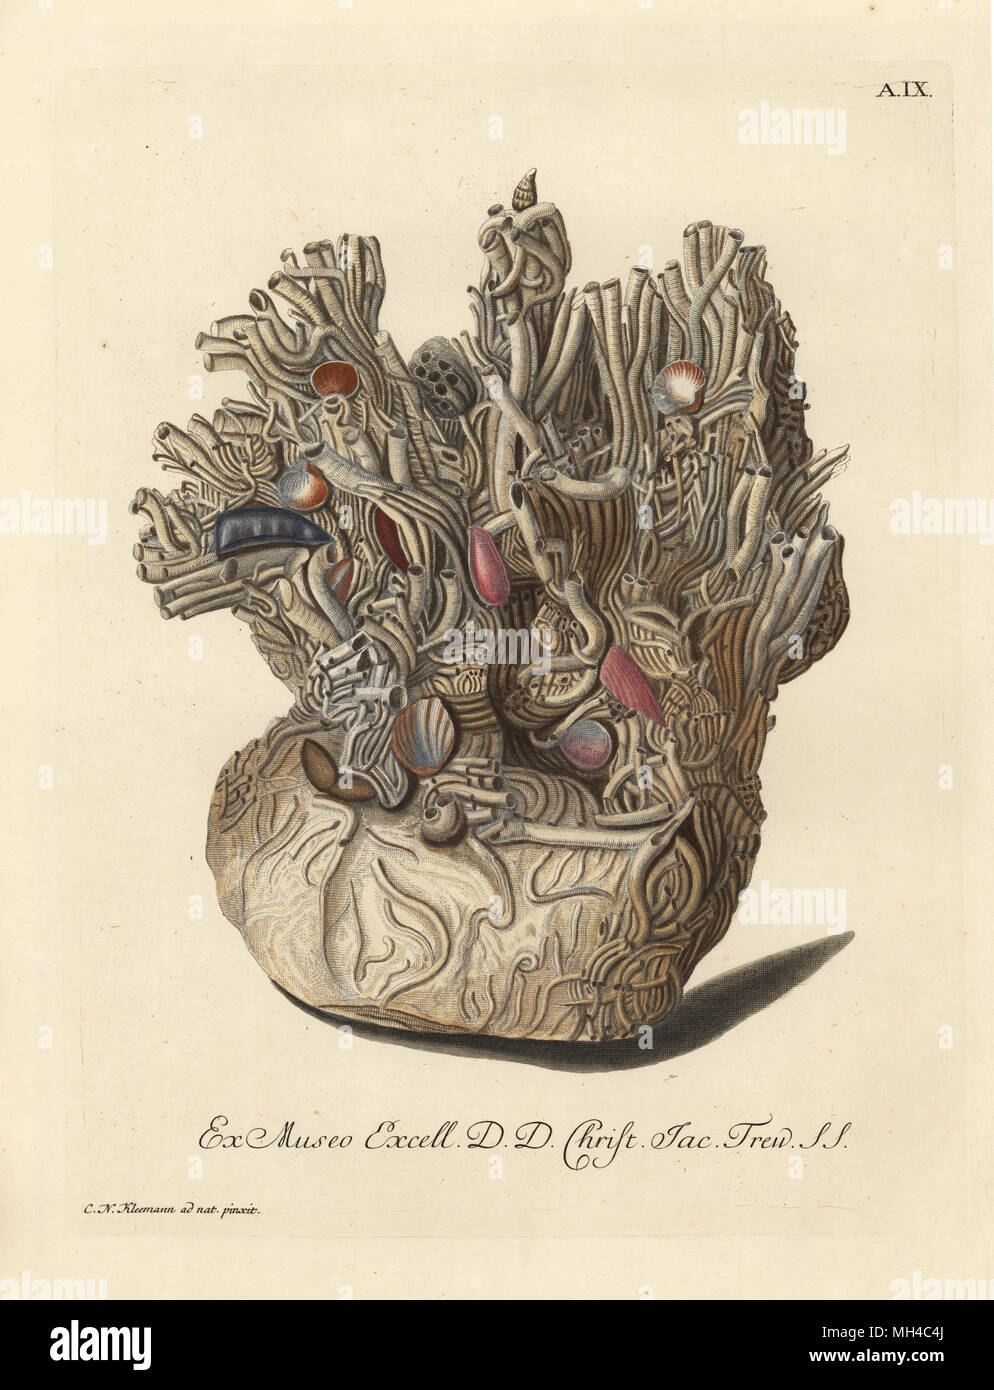 Nest of sponge coral, Halcyonium durum, Geodia cydonium? Handcoloured copperplate engraving after an illustration by Christian Nicolaus Kleemann from Georg Wolfgang Knorr's Deliciae Naturae Selectae of Kabinet van Zeldzaamheden der Natuur, Blusse and Son, Nuremberg, 1771. Specimens from a Wunderkammer or Cabinet of Curiosities owned by Dr. Christoph Jacob Trew in Nuremberg. Stock Photo